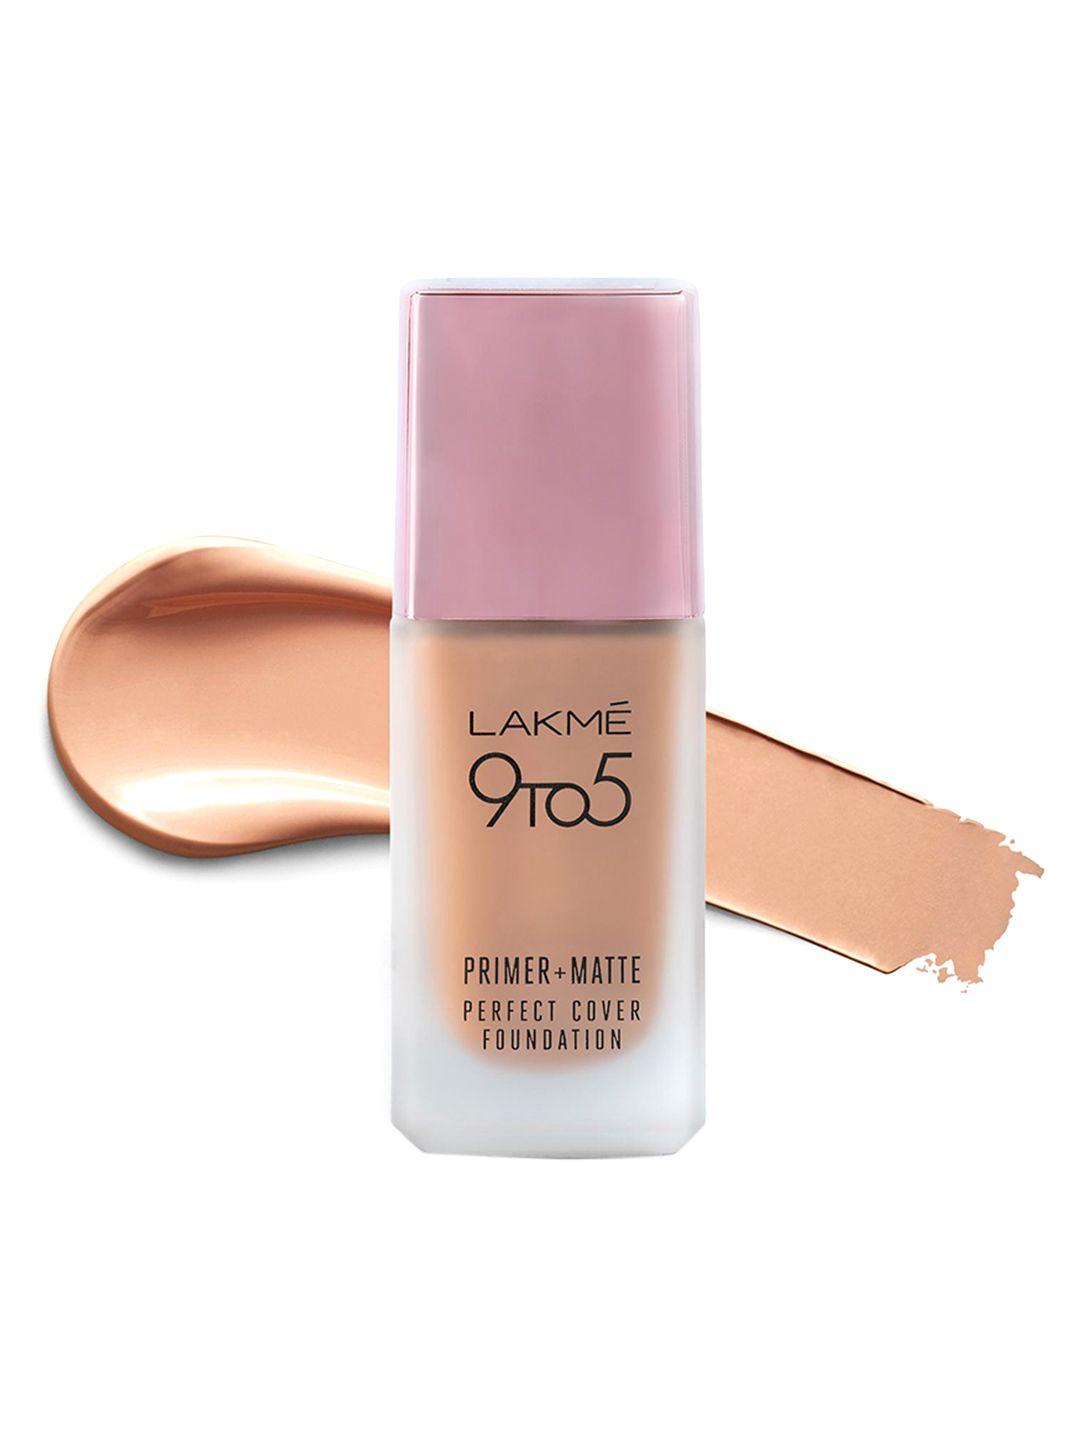 lakme 9 to 5 primer and matte perfect cover foundation - cool rose c140 25 ml